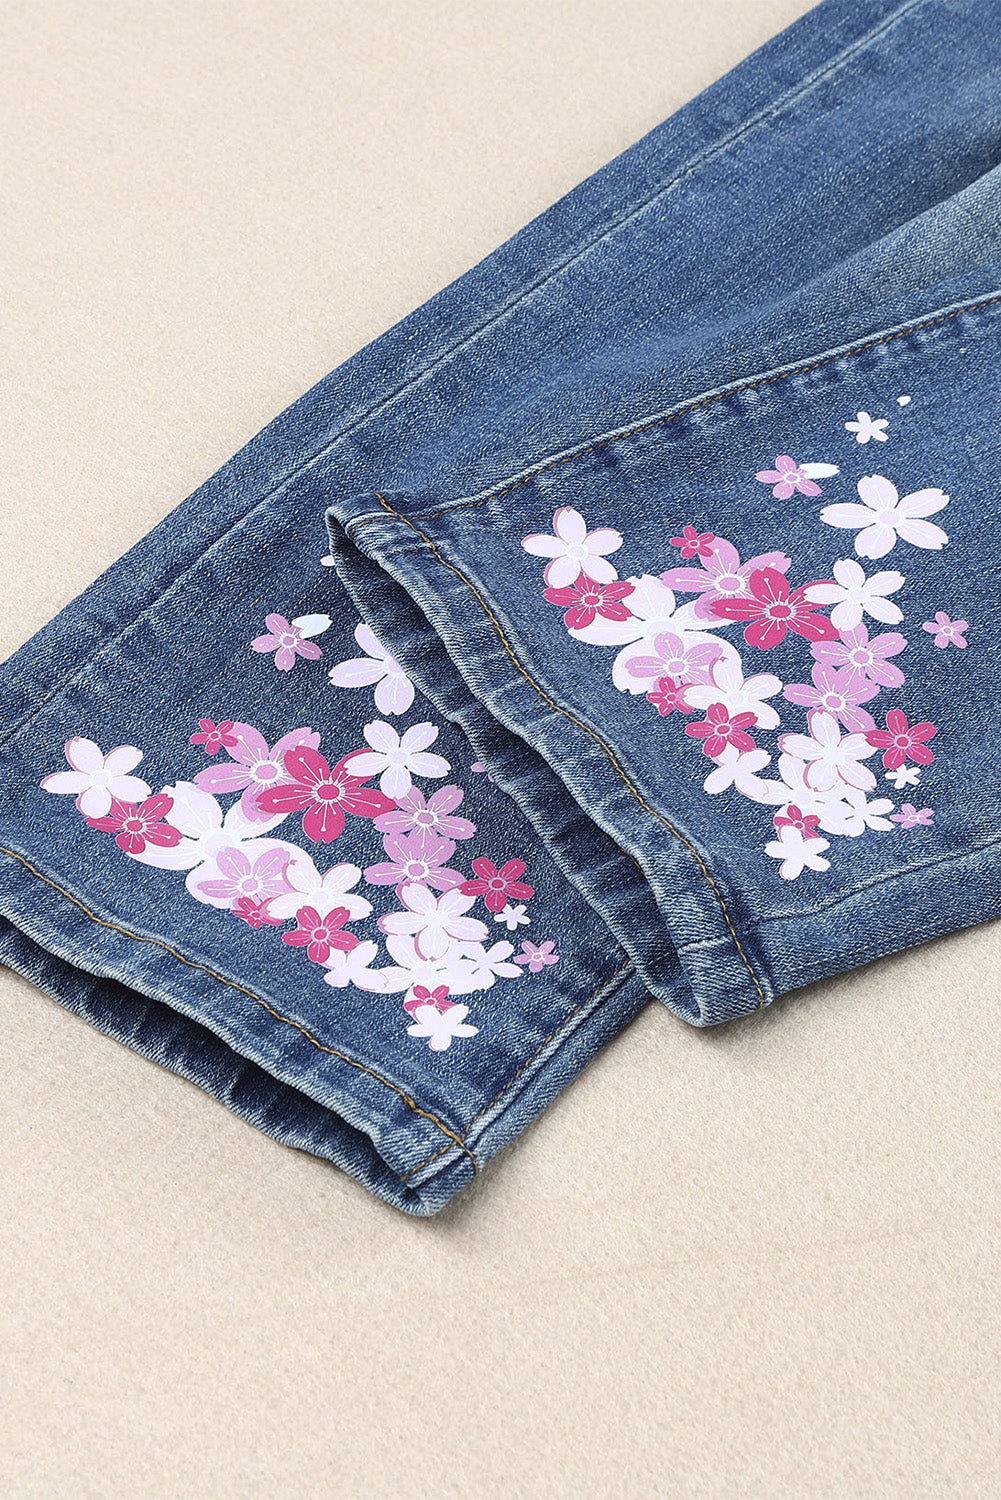 Sky Blue Cherry Blossom Pattern Splicing Mid Waist Distressed Jeans Graphic Pants JT's Designer Fashion